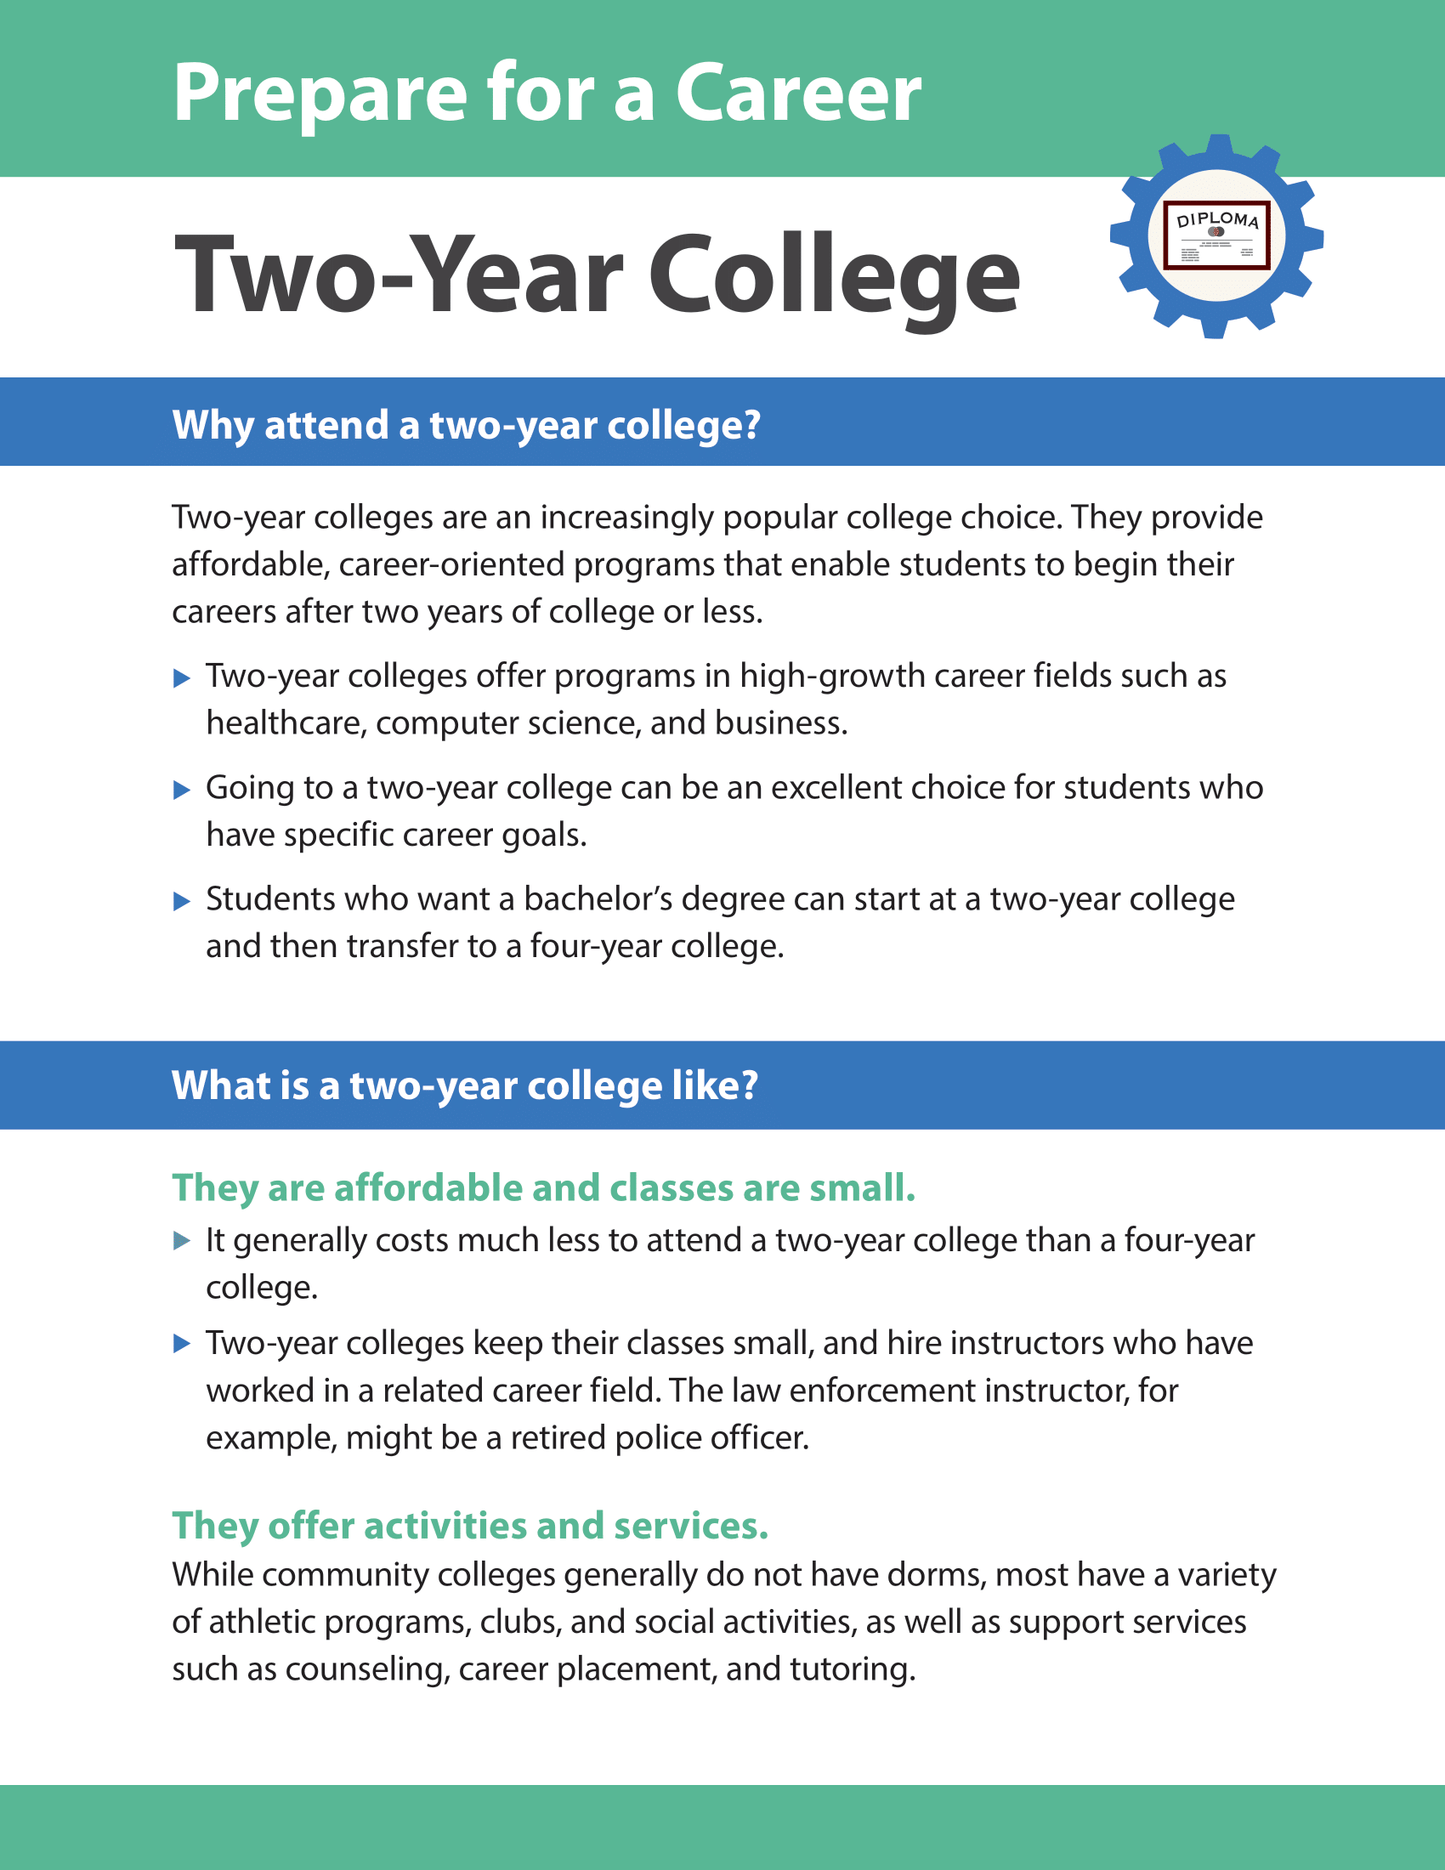 Prepare for a Career - Two-Year College